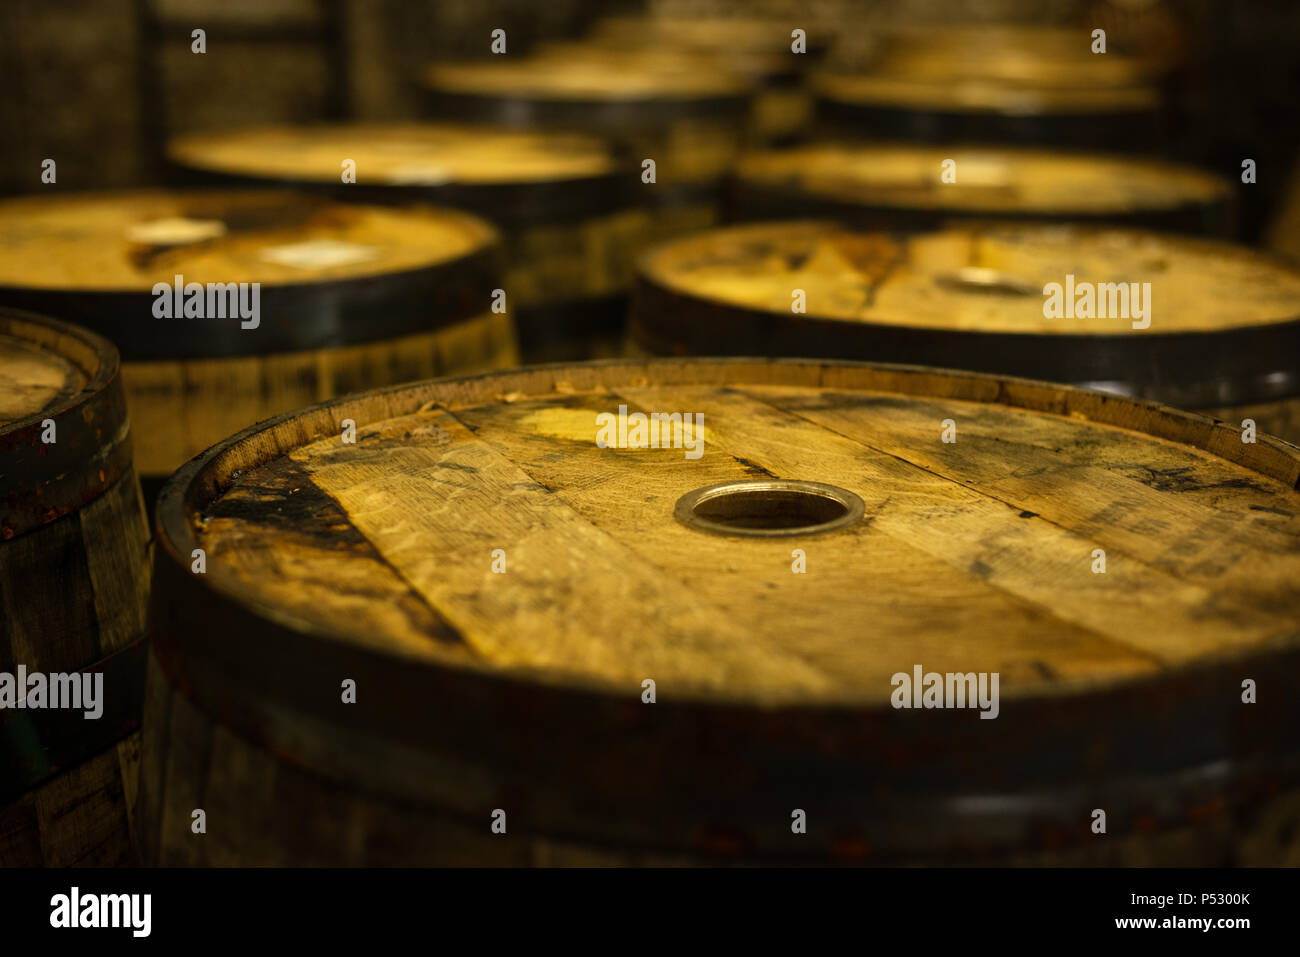 Row of empty wooden barrels or casks in the Old Jameson Whiskey Distillery in Midleton, County Cork, Ireland. Stock Photo